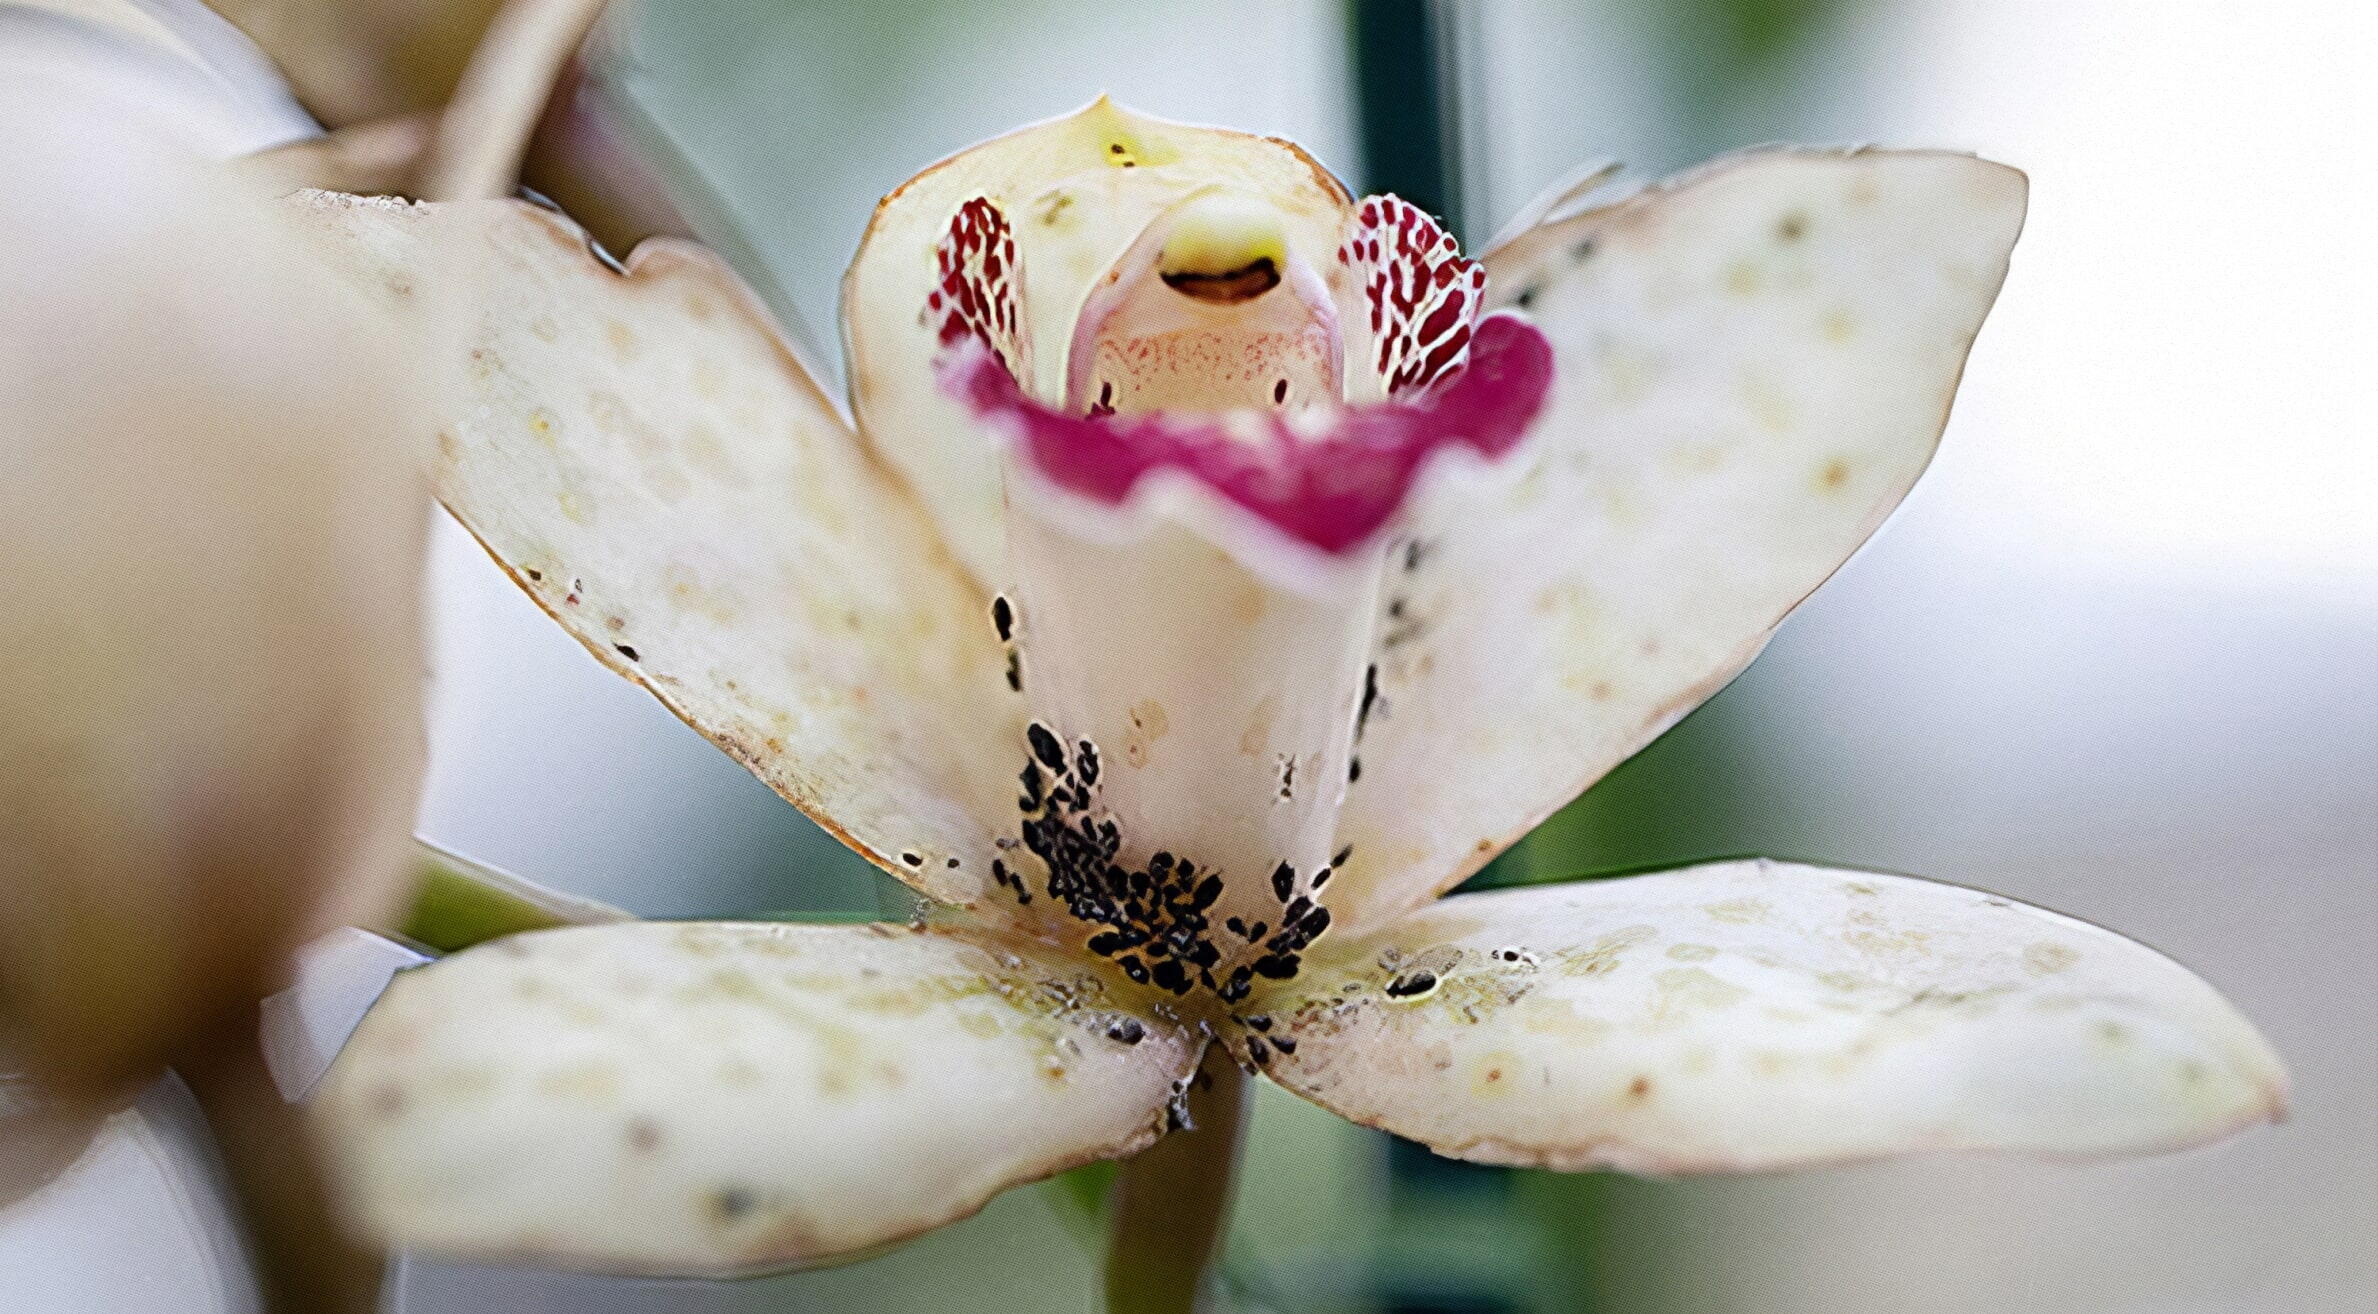 Pests of orchids